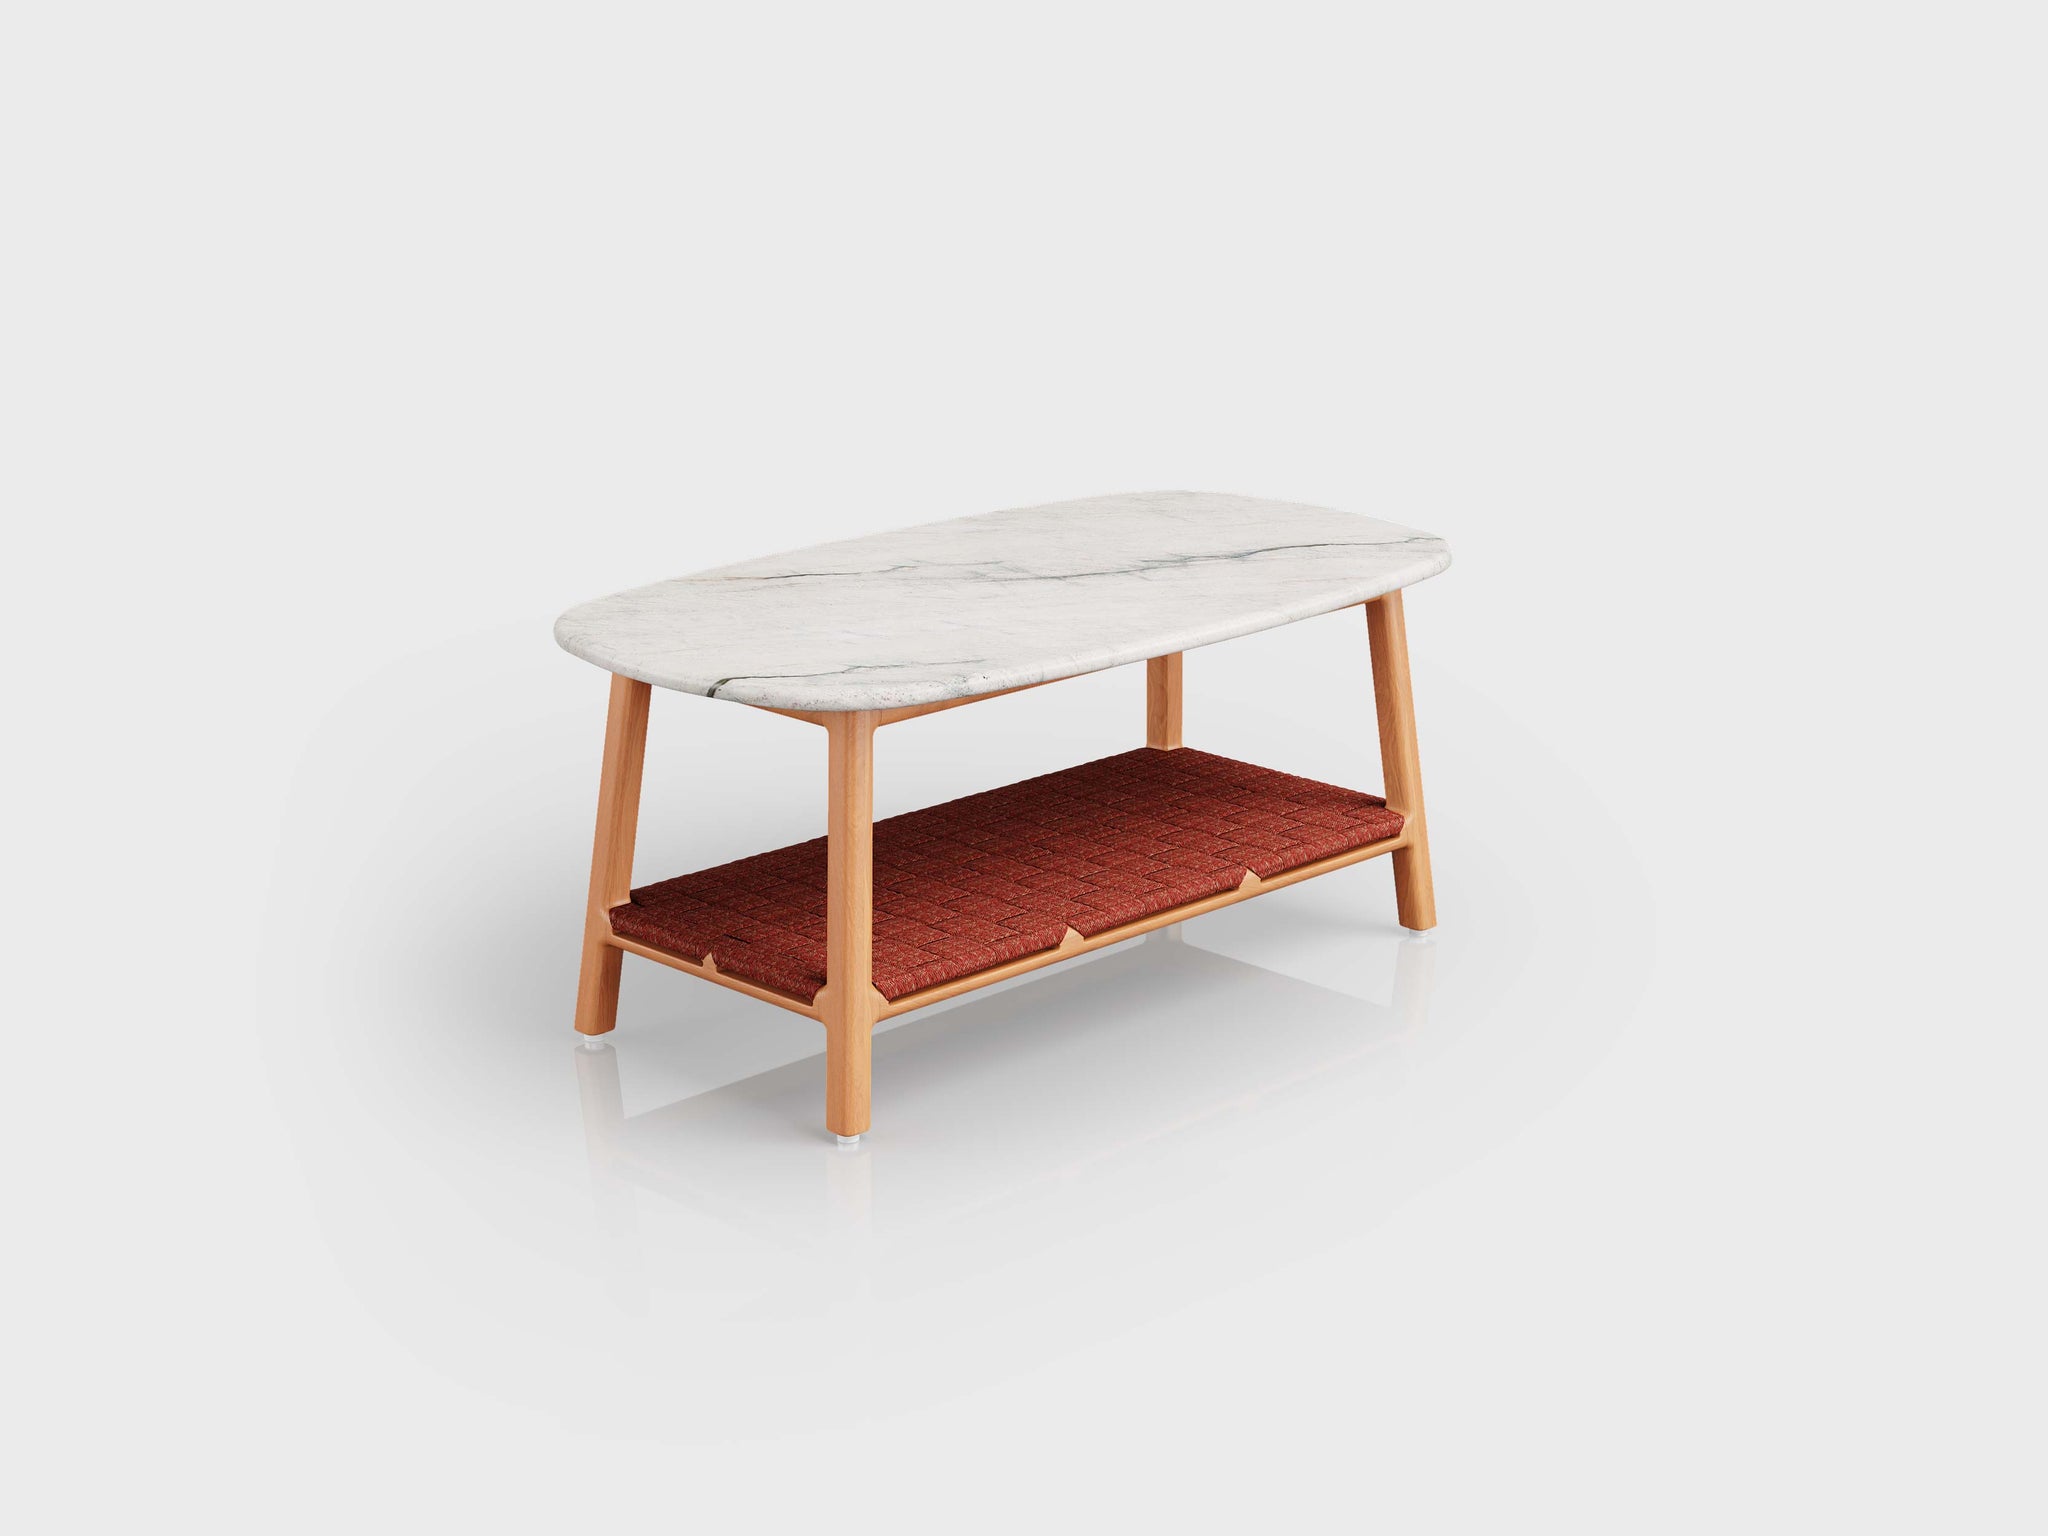 Padang coffee table with wooden structure, aluminium support and stone top, designed by Luciano Mandelli